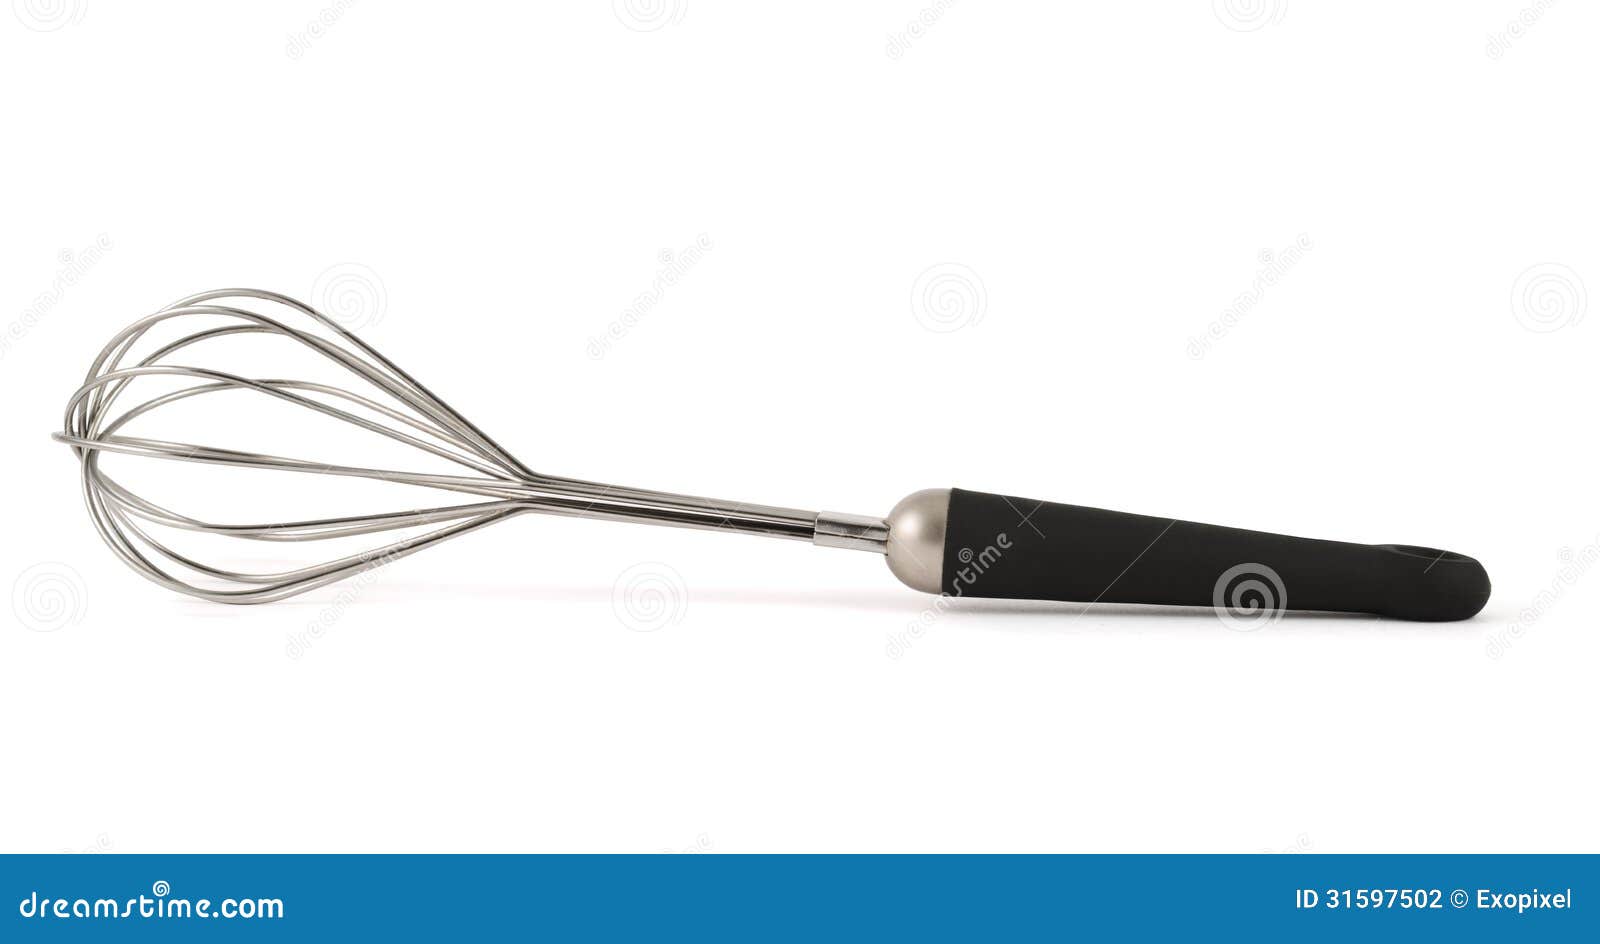 https://thumbs.dreamstime.com/z/manual-hand-egg-beater-mixer-isolated-over-white-background-front-view-31597502.jpg